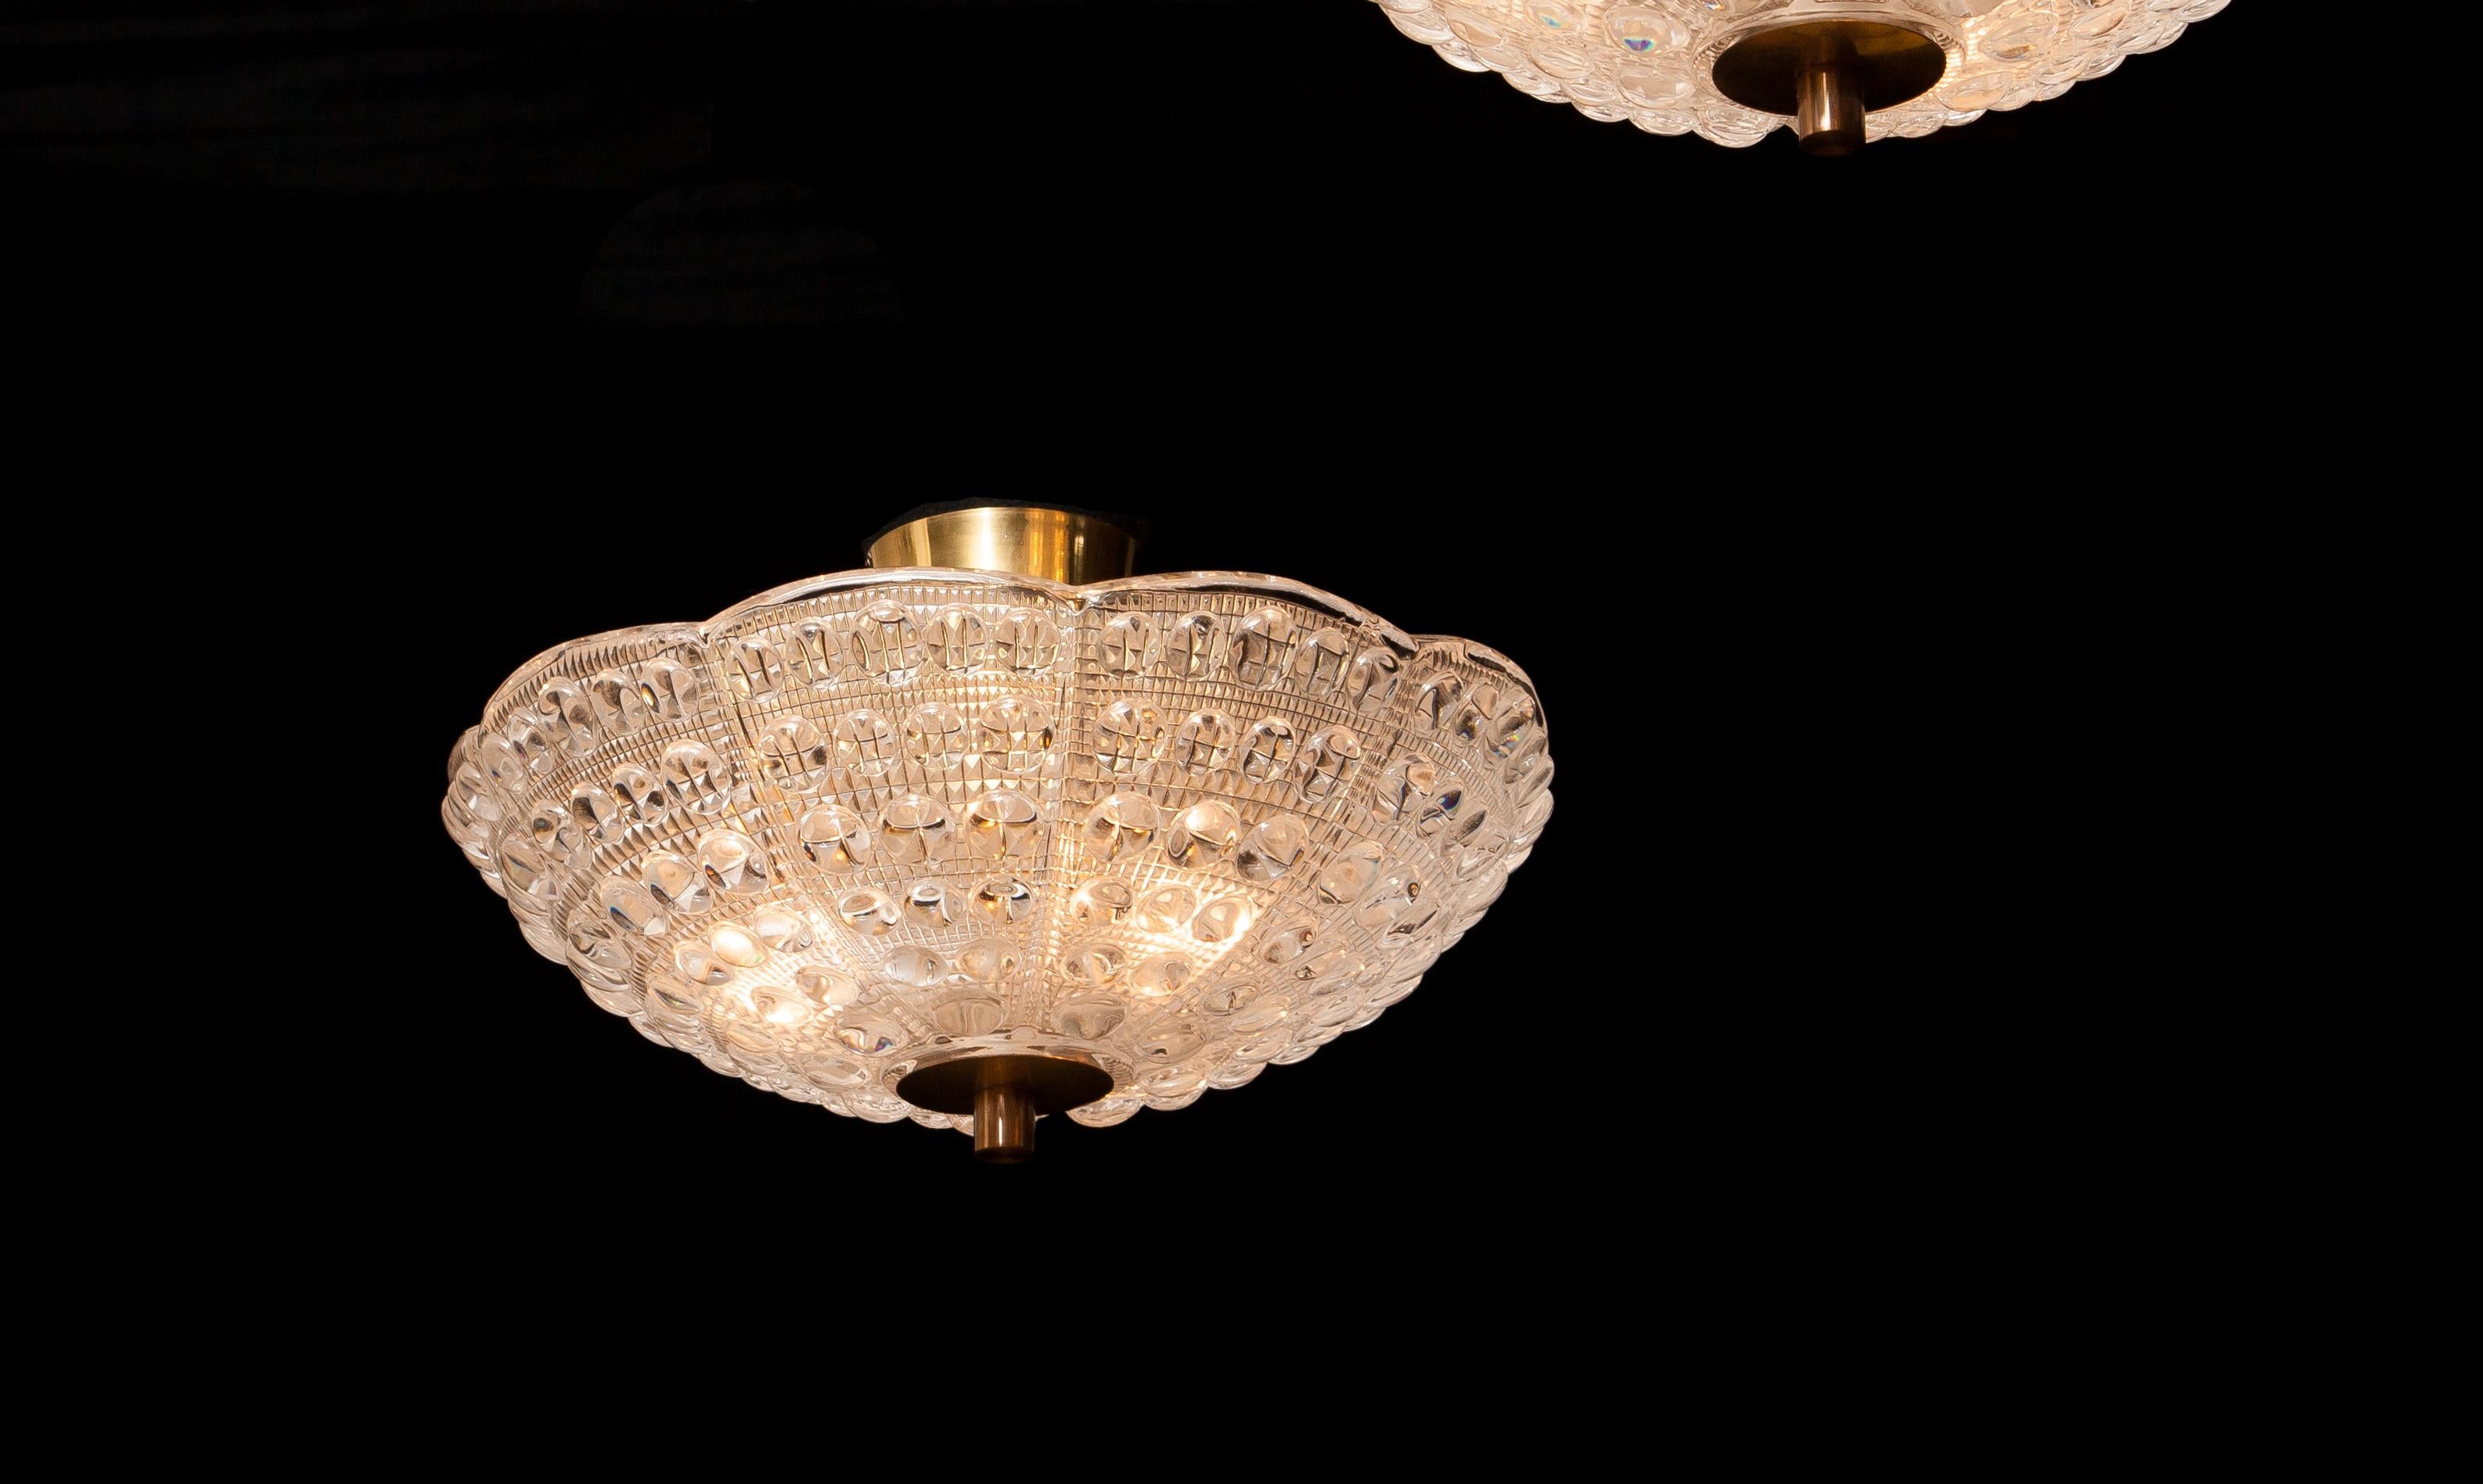 Pair of Crystal and Brass Ceiling Lights by Carl Fagerlund for Orrefors, 1960s (Moderne der Mitte des Jahrhunderts)